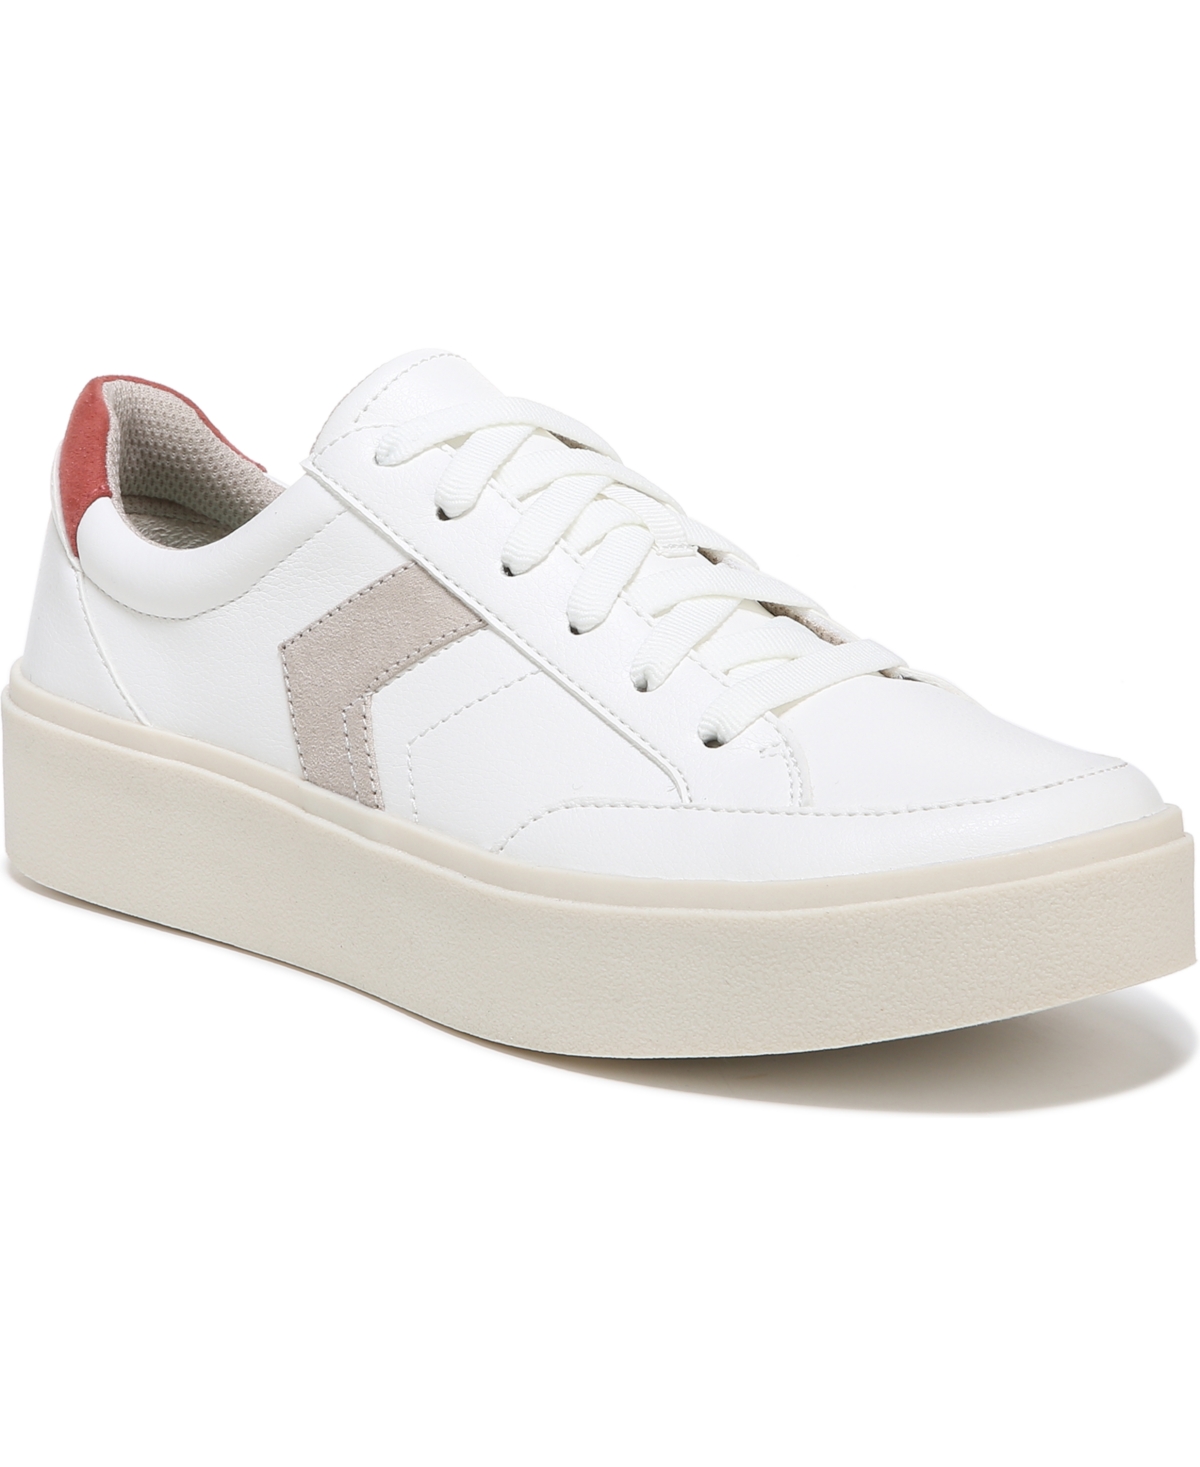 Women's Madison-Lace Sneakers - White/Black Faux Leather